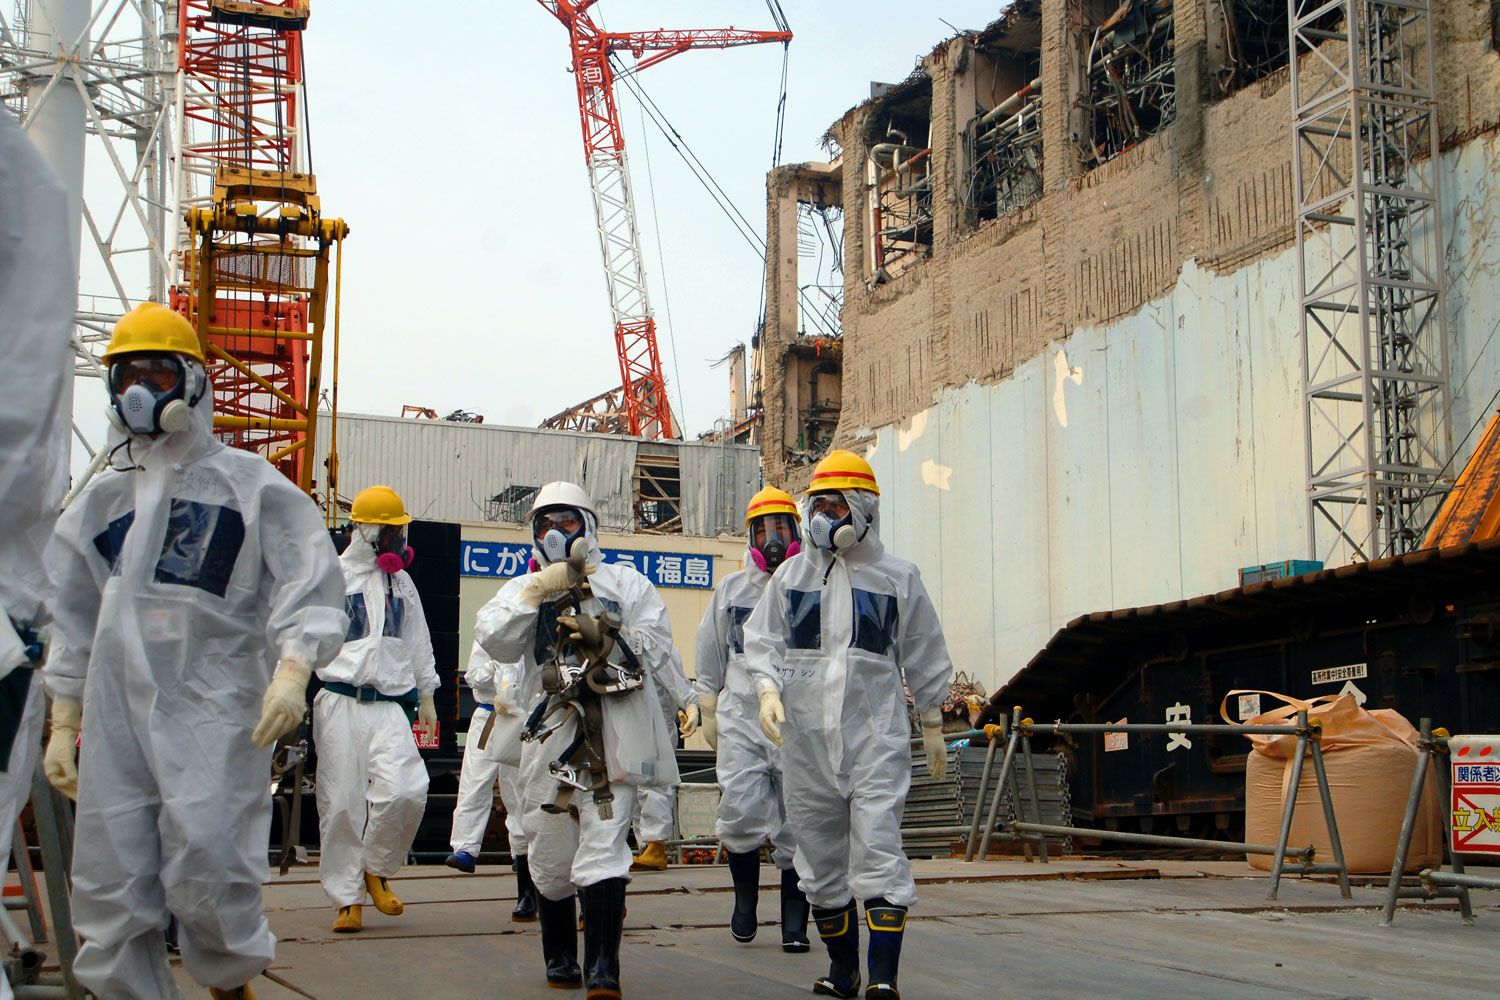 Lessons from Fukushima: Prepare for the unlikely